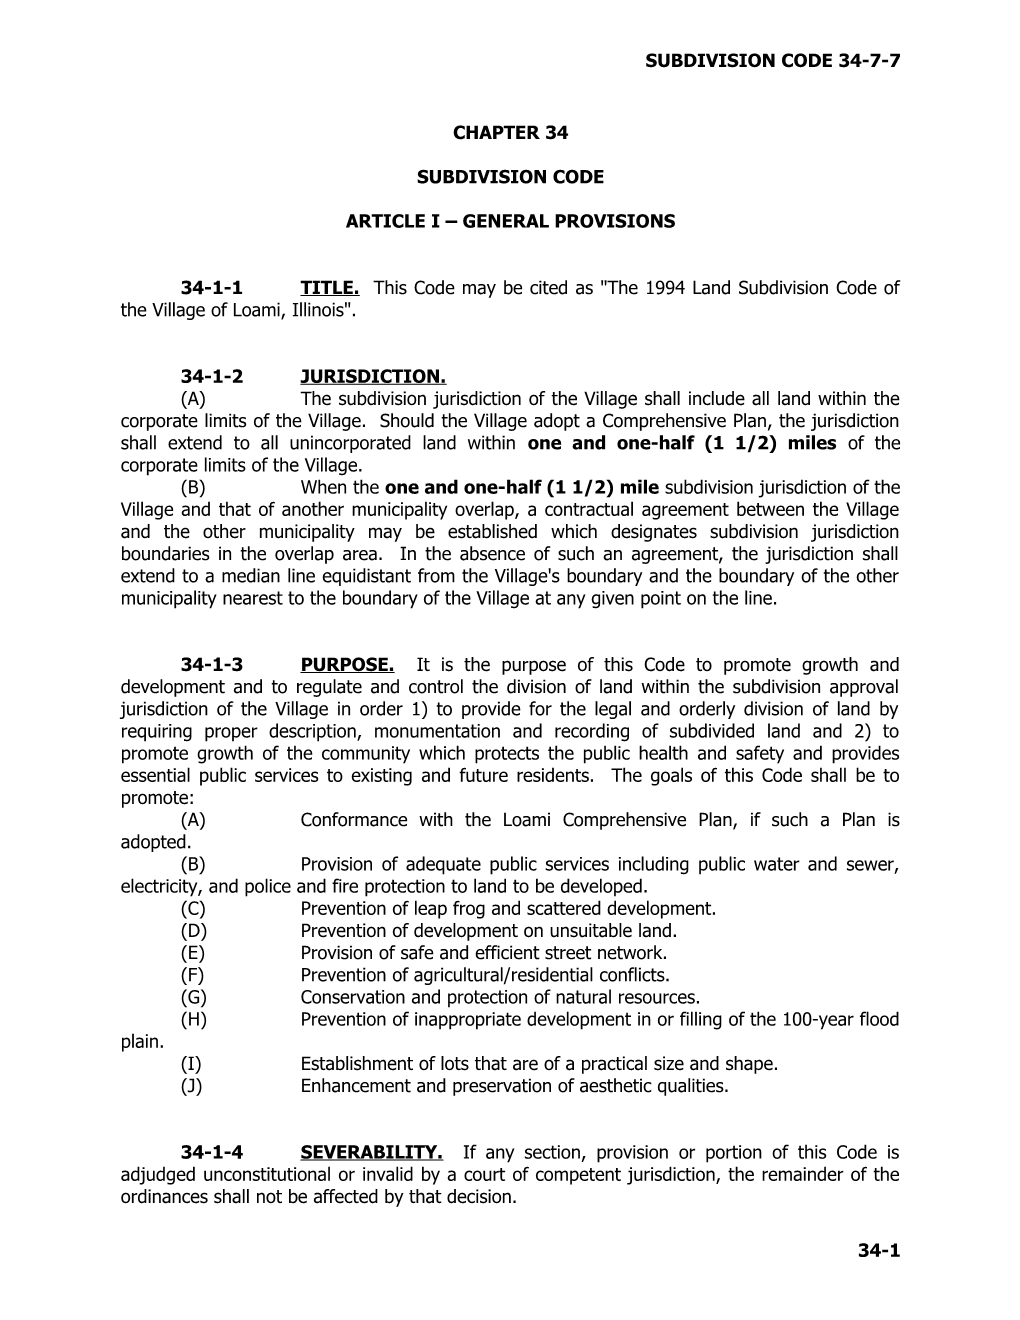 Subdivision Code Article I General Provisions